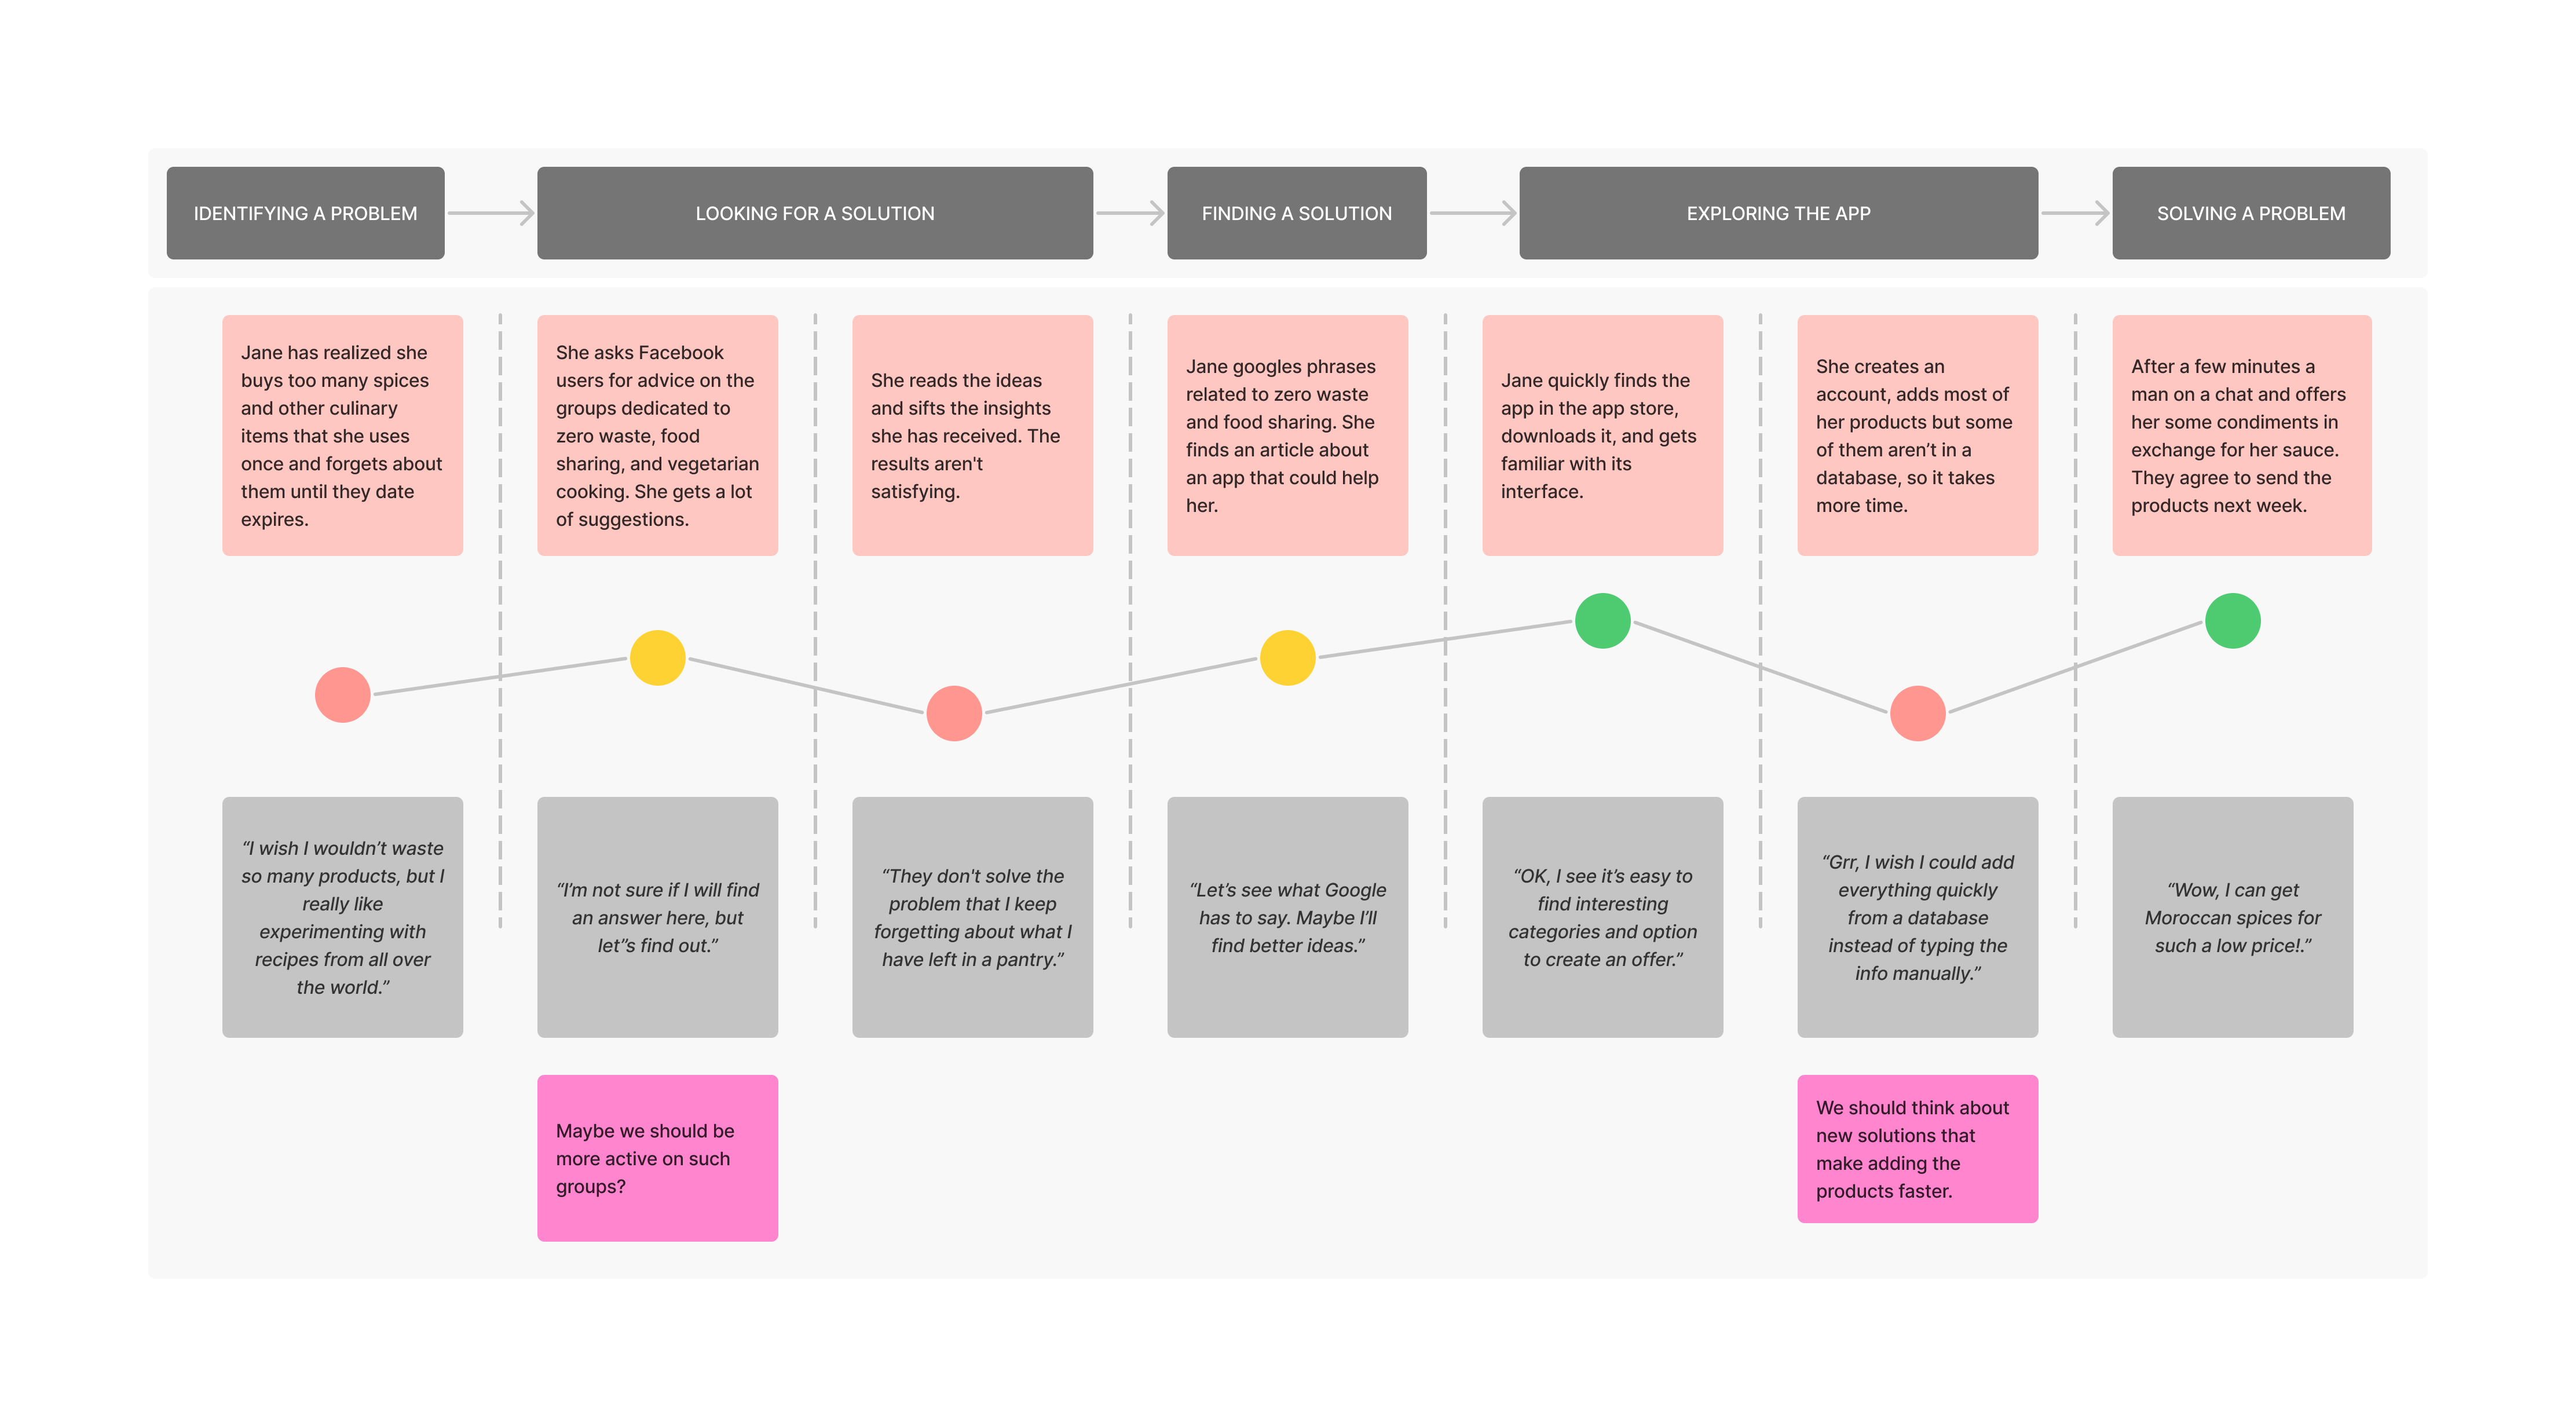 An example of a customer journey map.